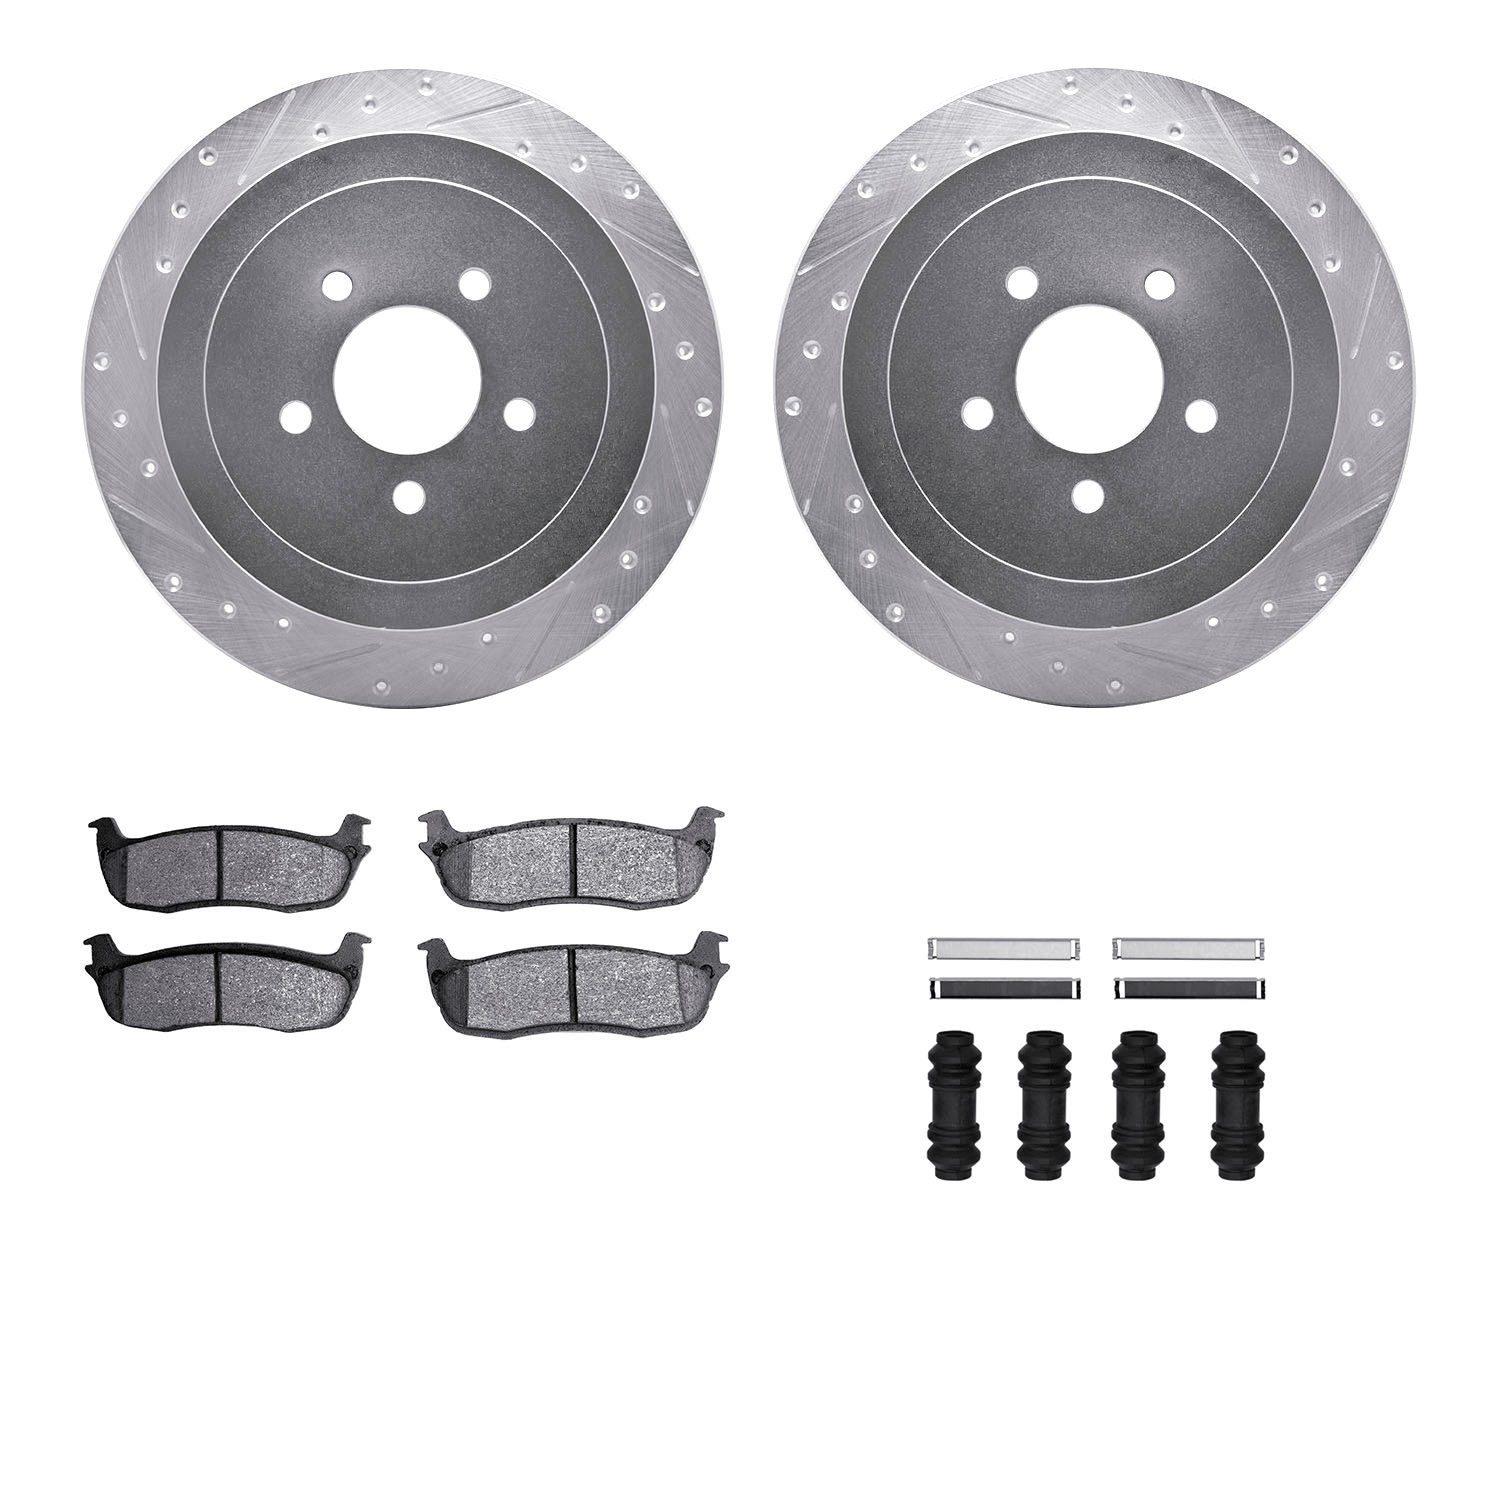 7312-55004 Drilled/Slotted Brake Rotor with 3000-Series Ceramic Brake Pads Kit & Hardware [Silver], 2003-2011 Ford/Lincoln/Mercu